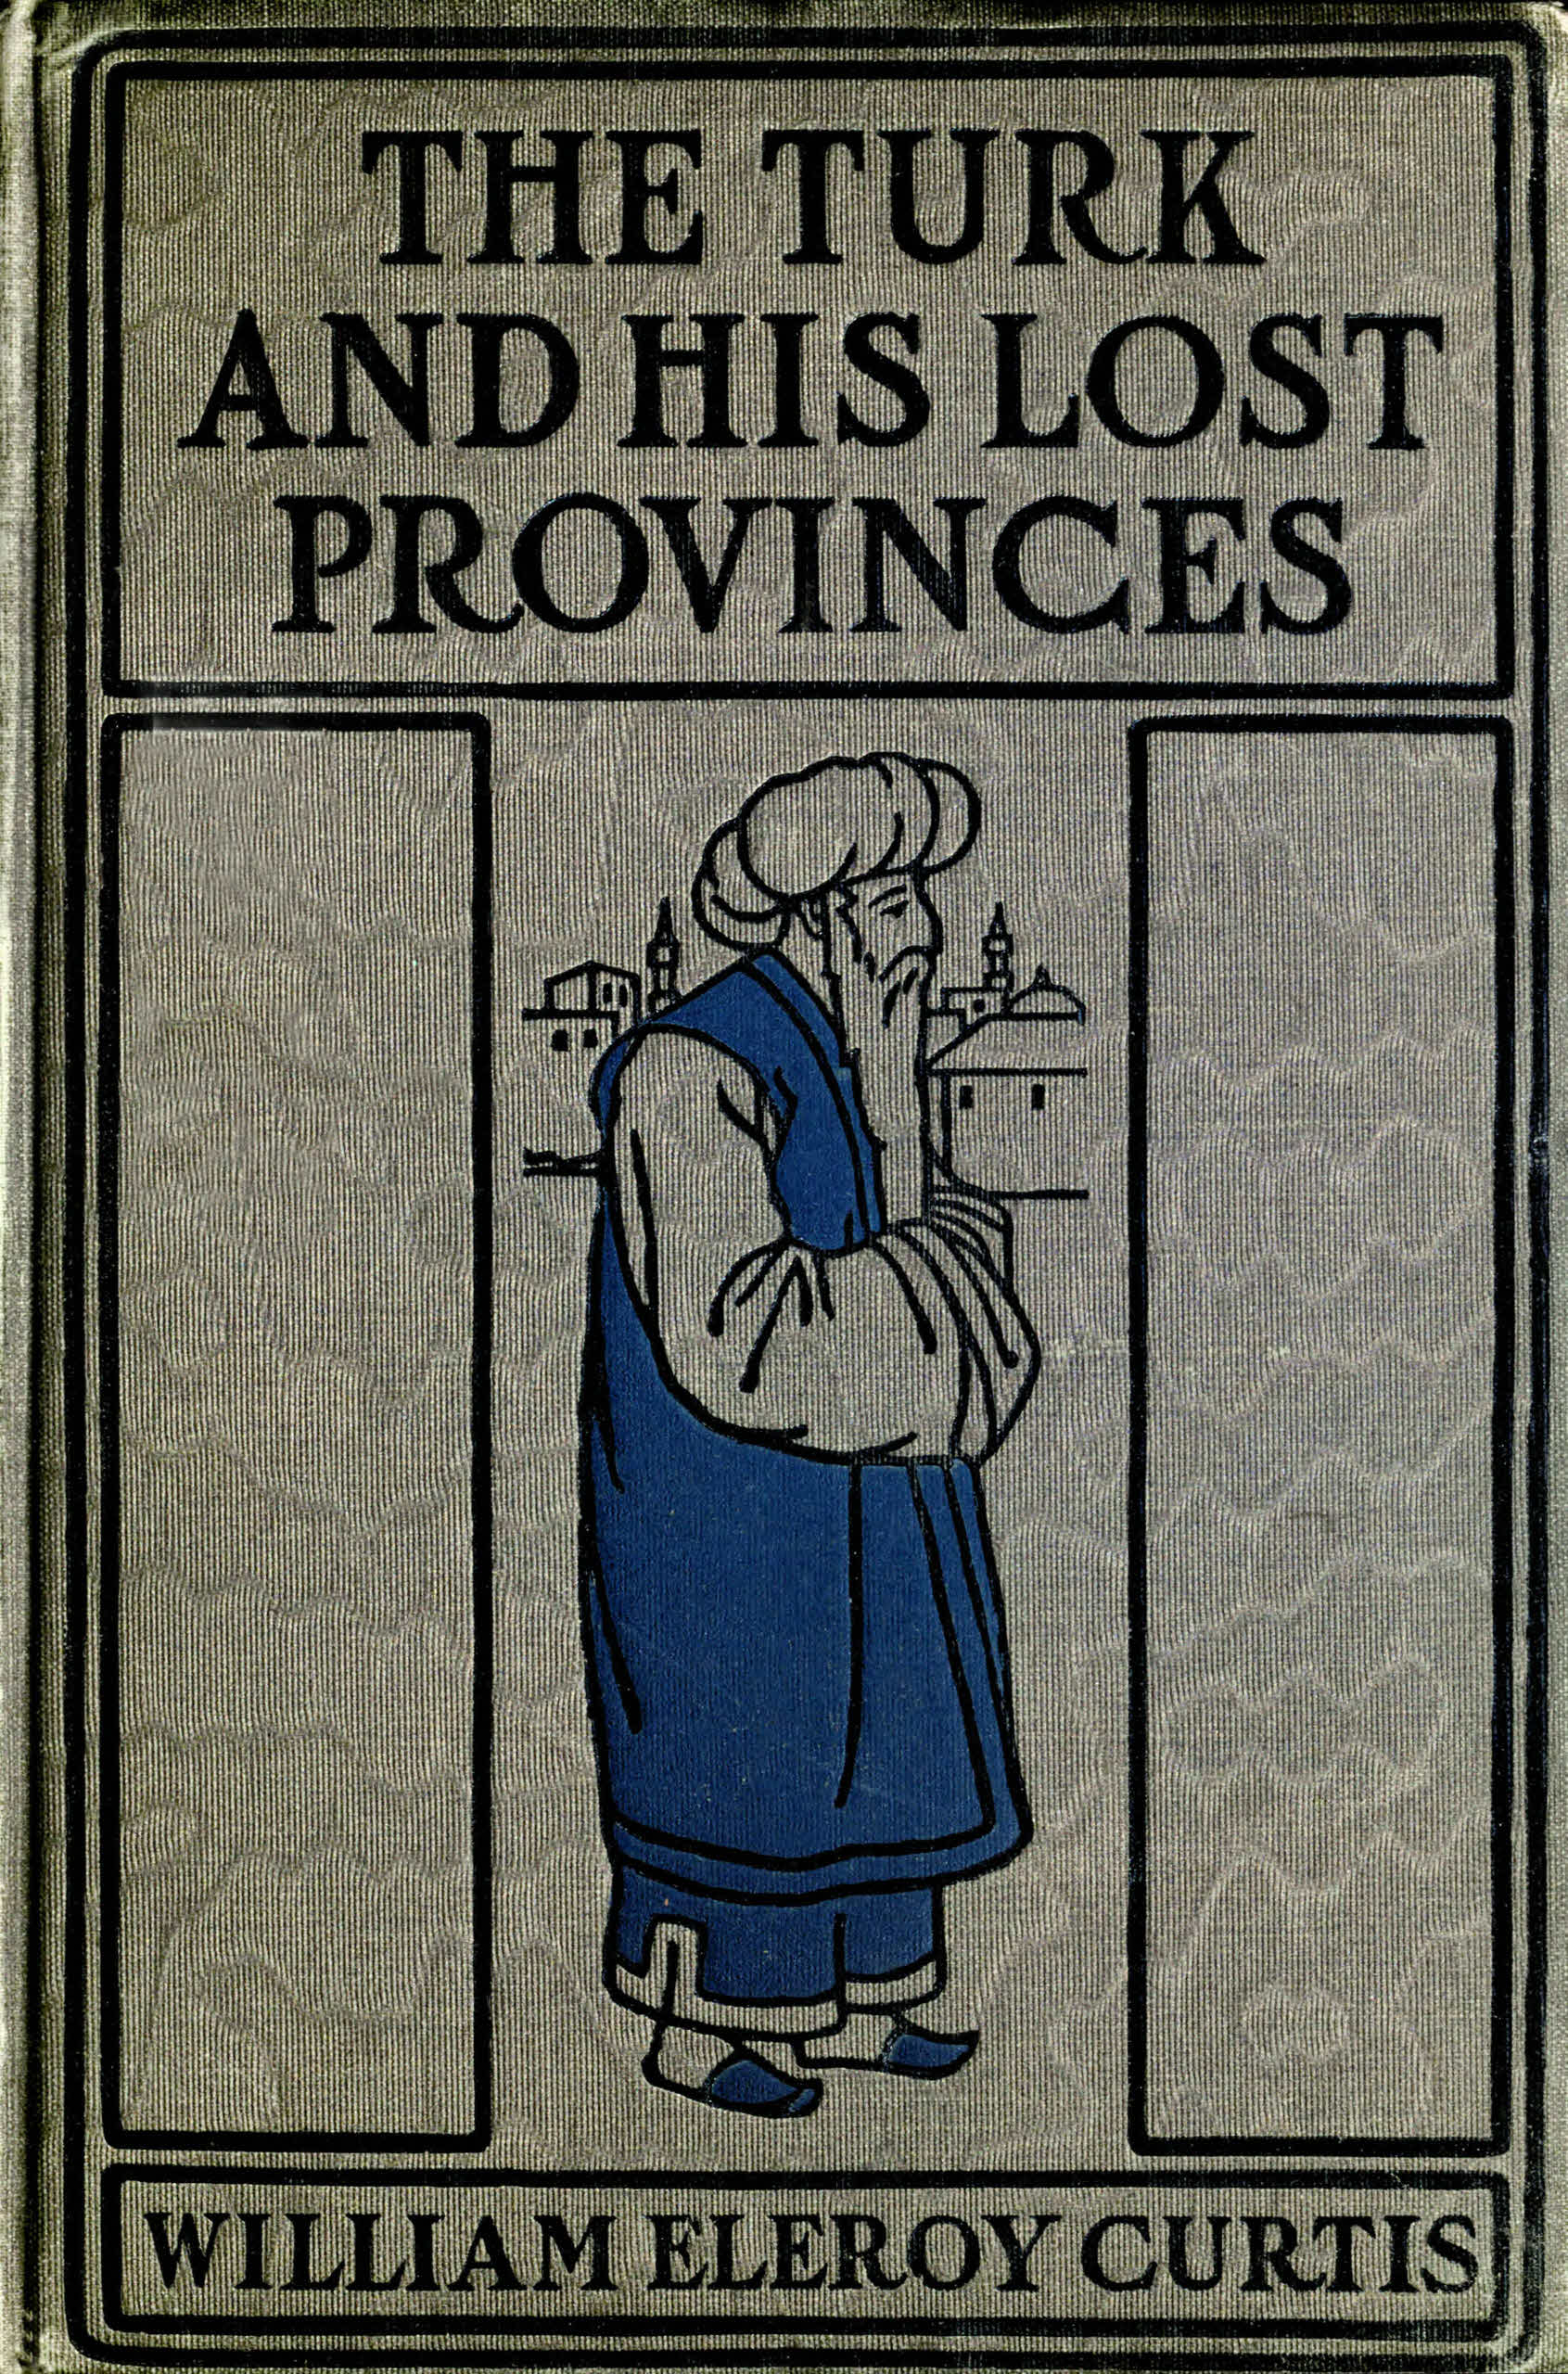 The Turk and his lost provinces Project Gutenberg photo